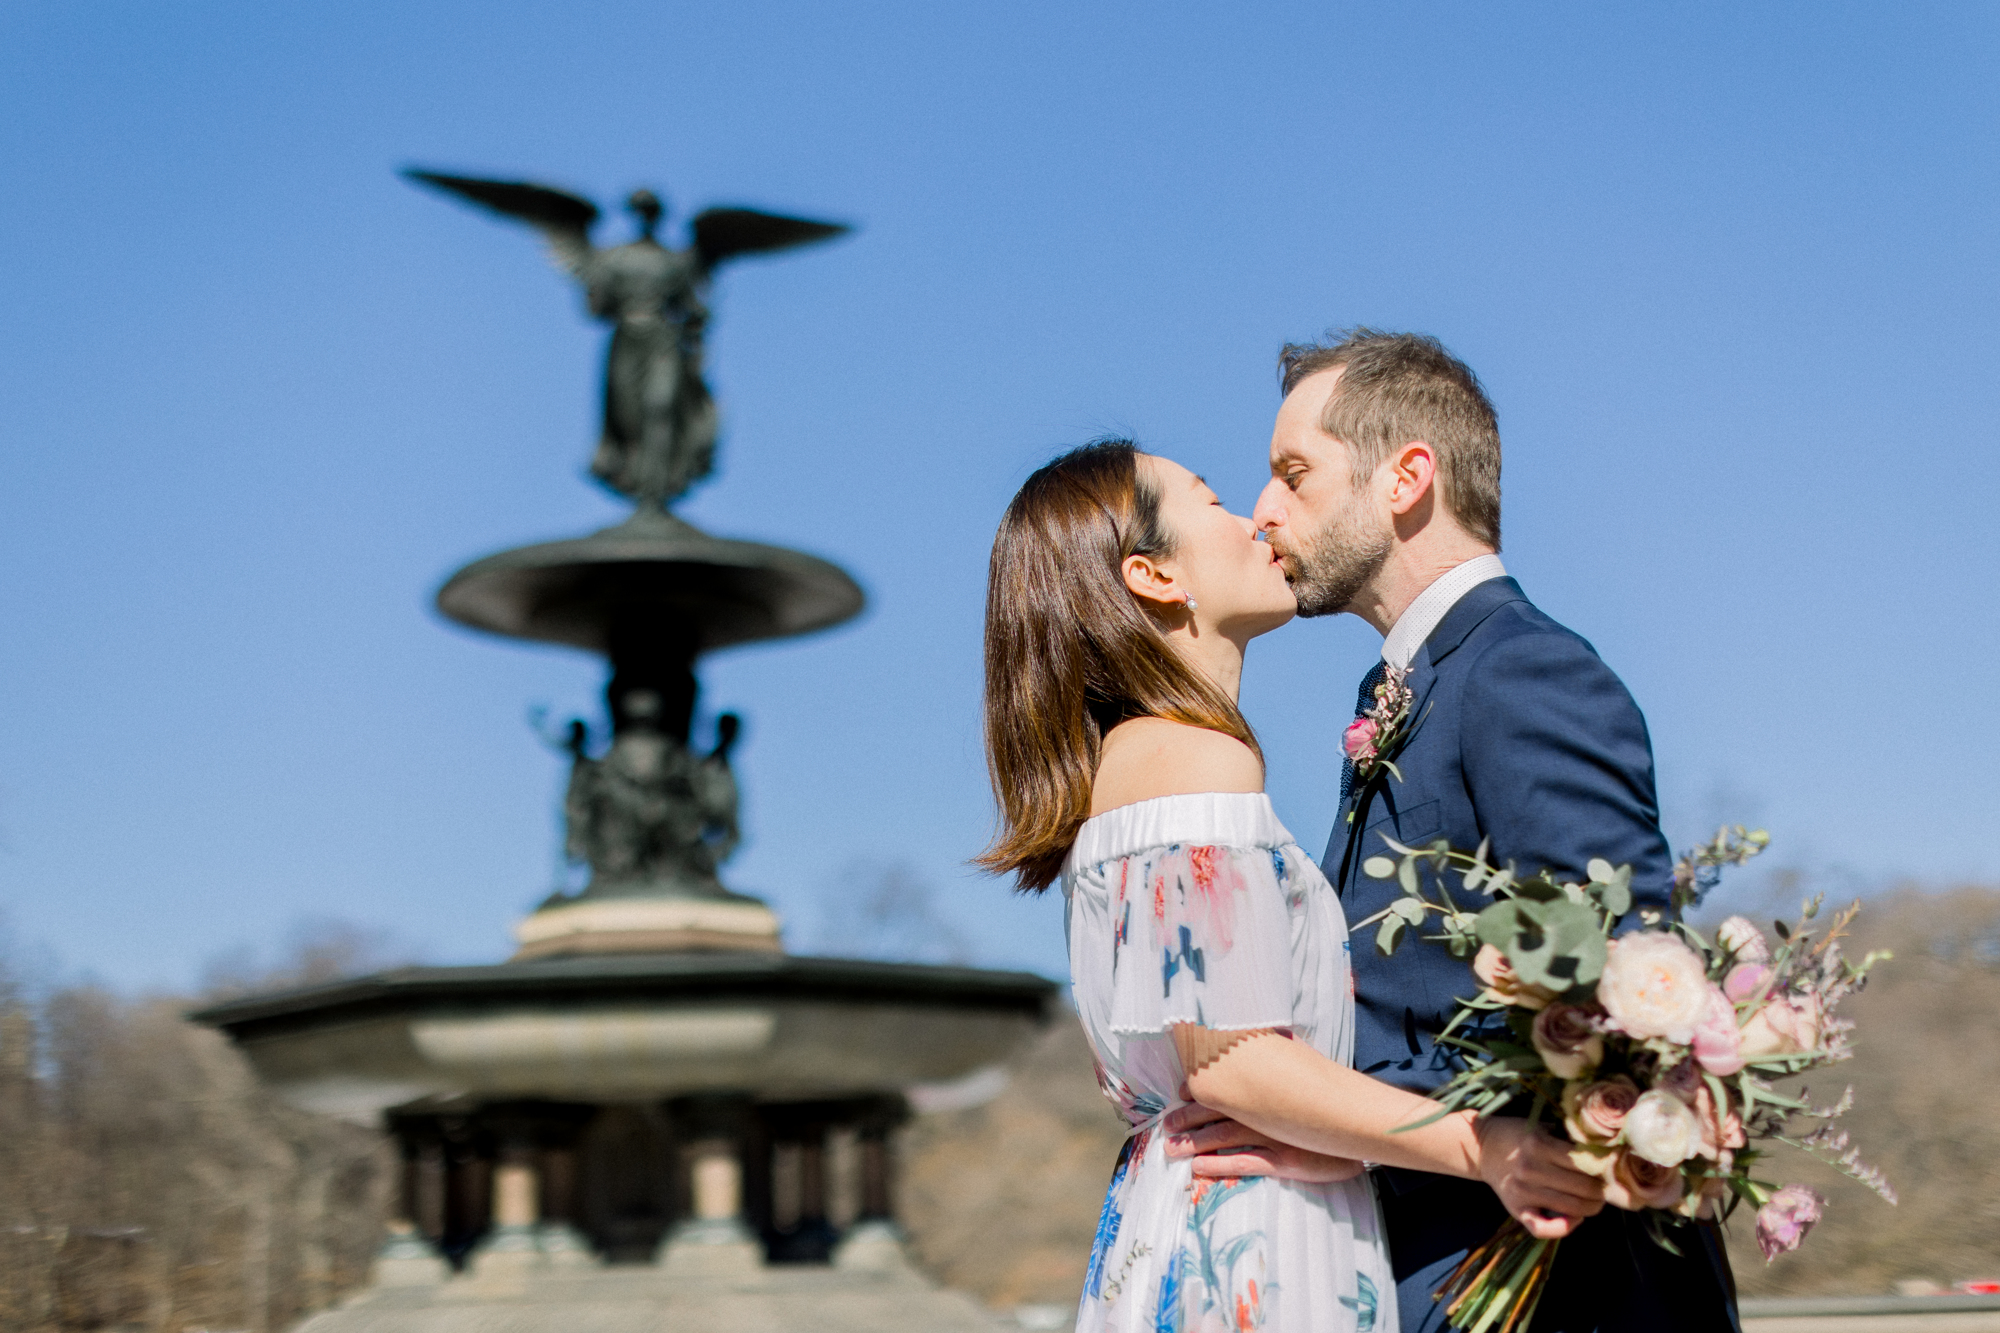 Flawless Central Park elopement locations